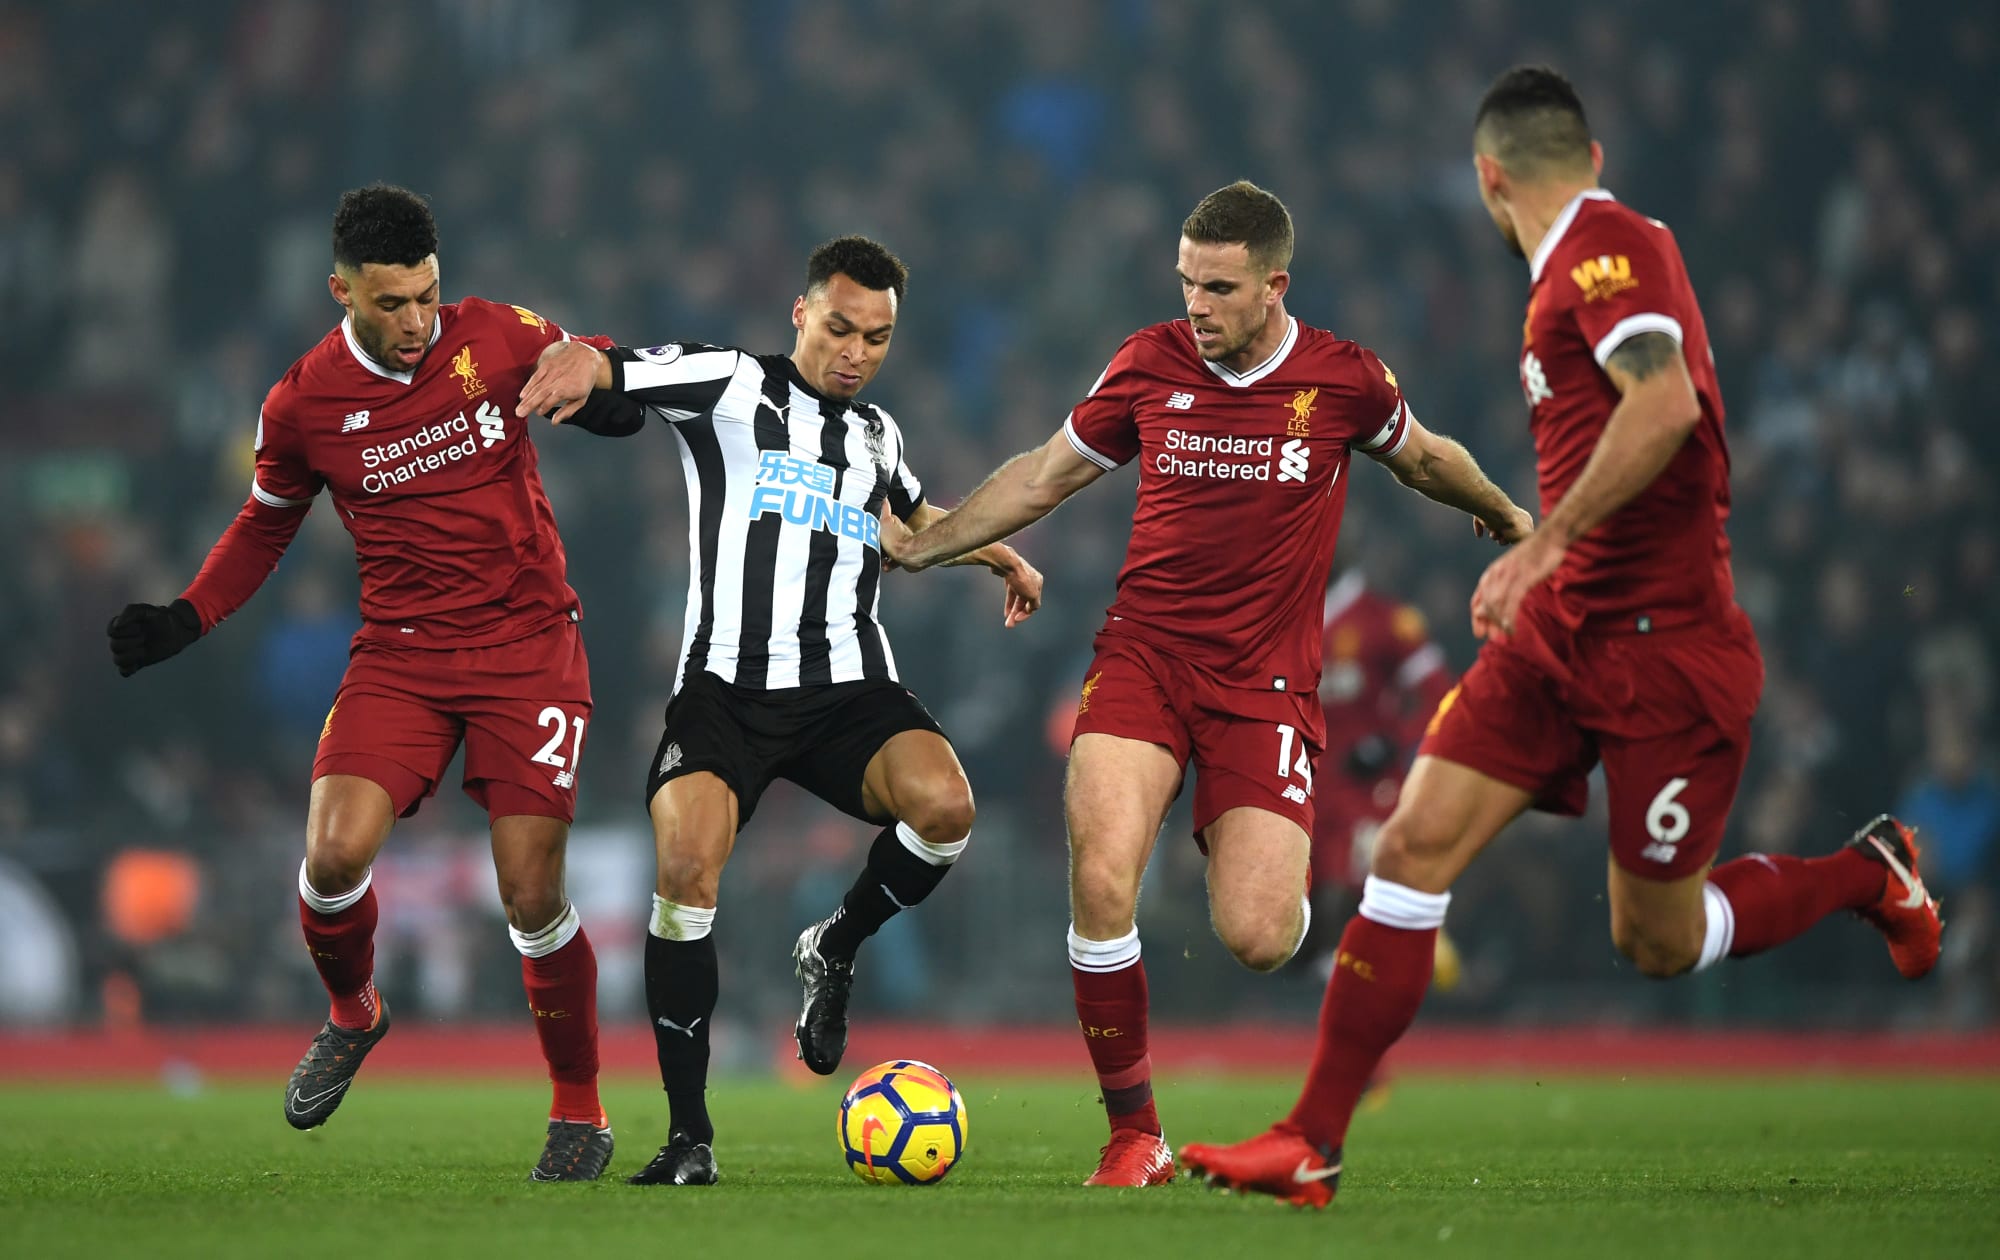 Liverpool vs Newcastle United live stream How to watch online for free